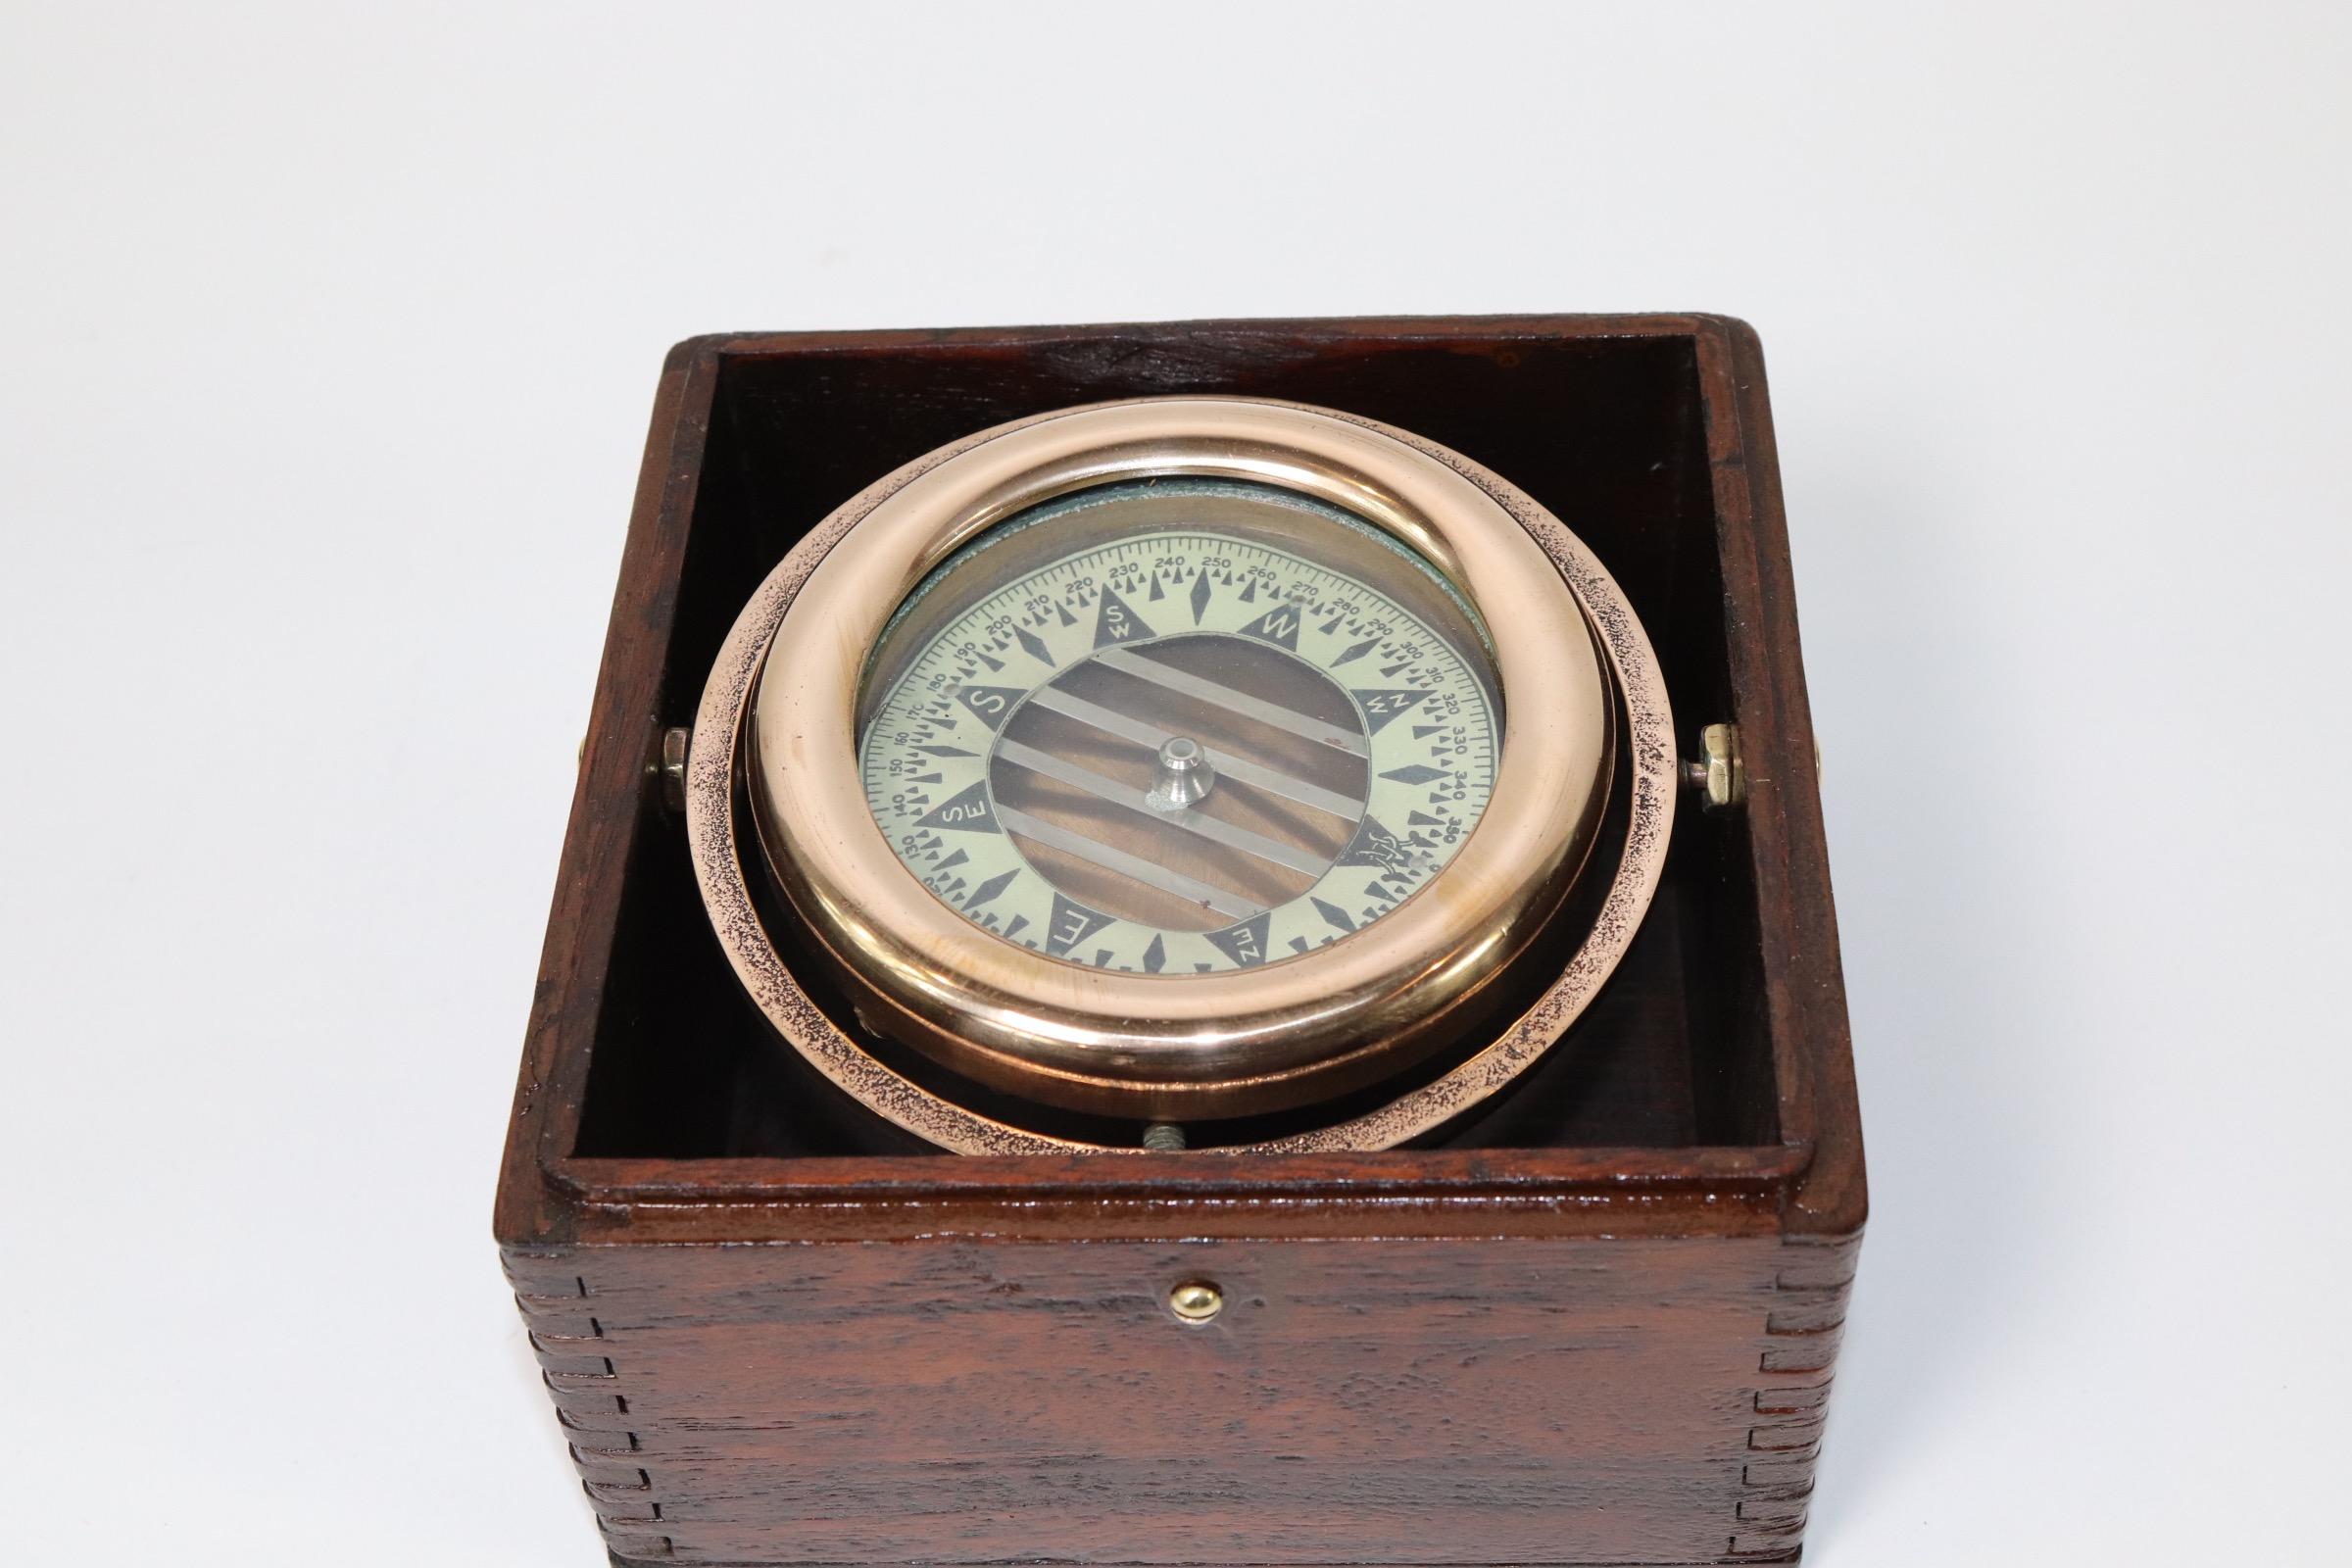 Boxed brass boat compass with gimbaled compass from Wilcox Crittendon of Connecticut. Varnished box with highly polished compass. Weight is 3 pounds.